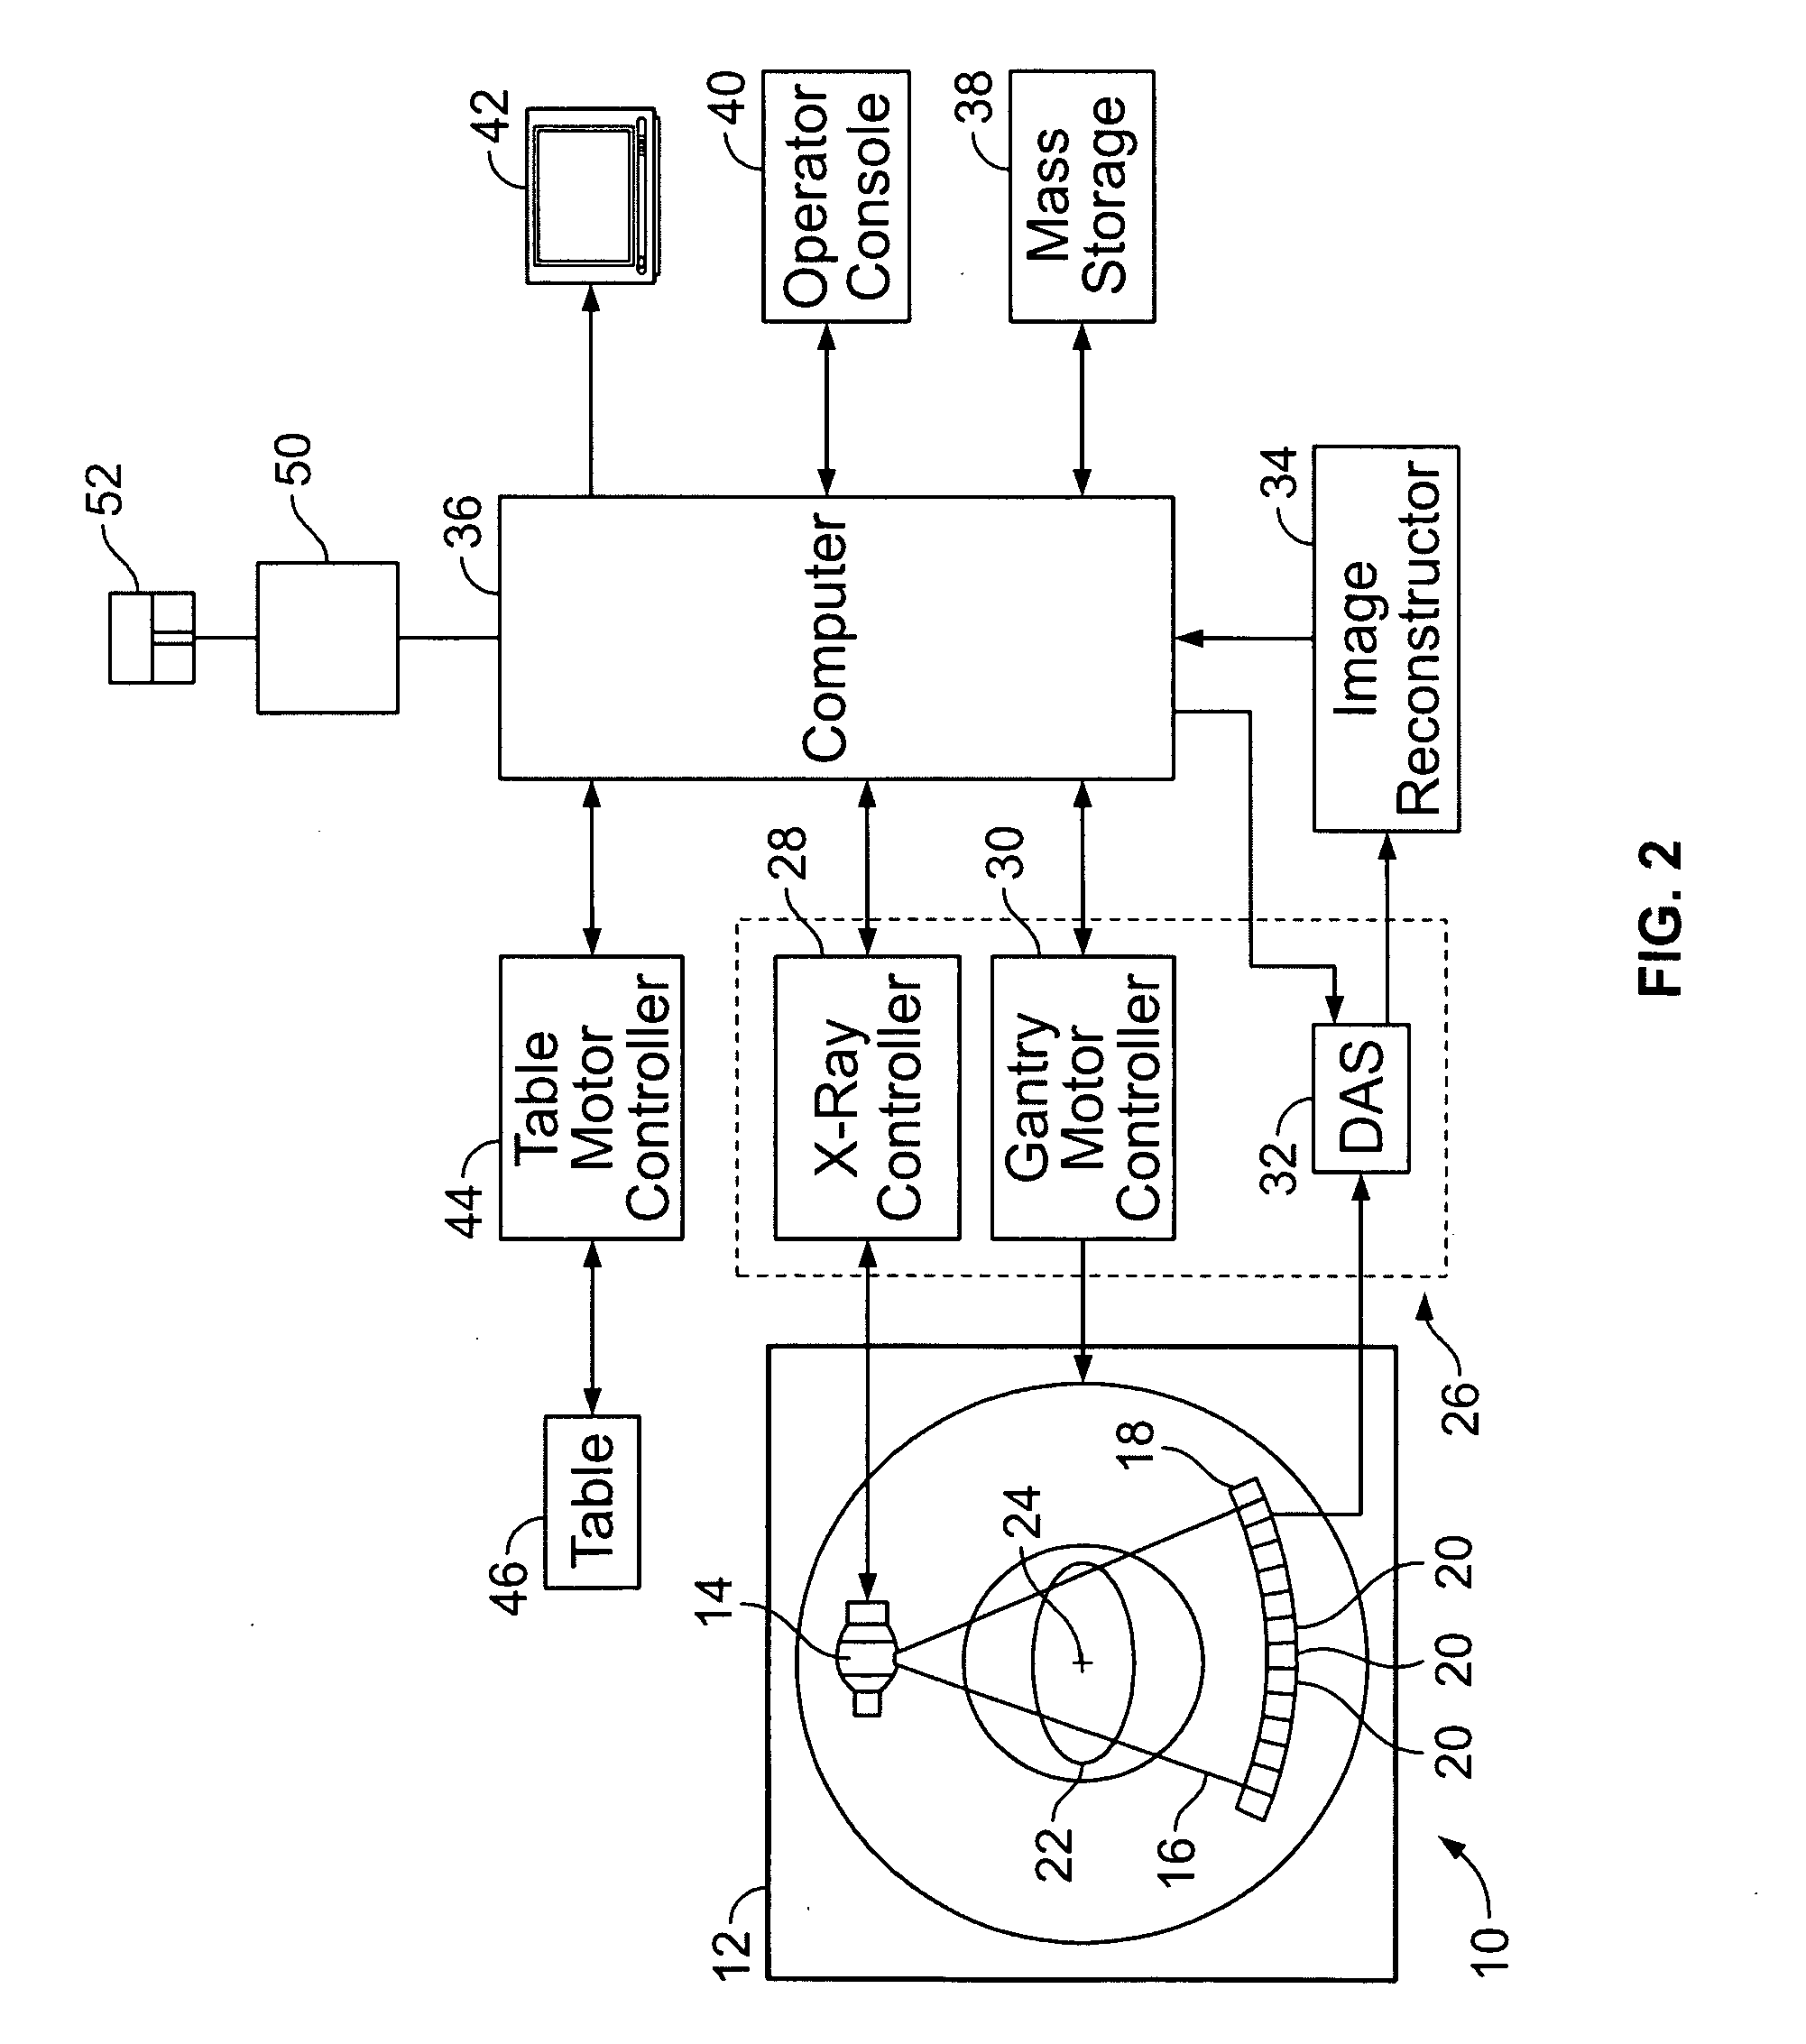 Methods and systems to facilitate reducing banding artifacts in images